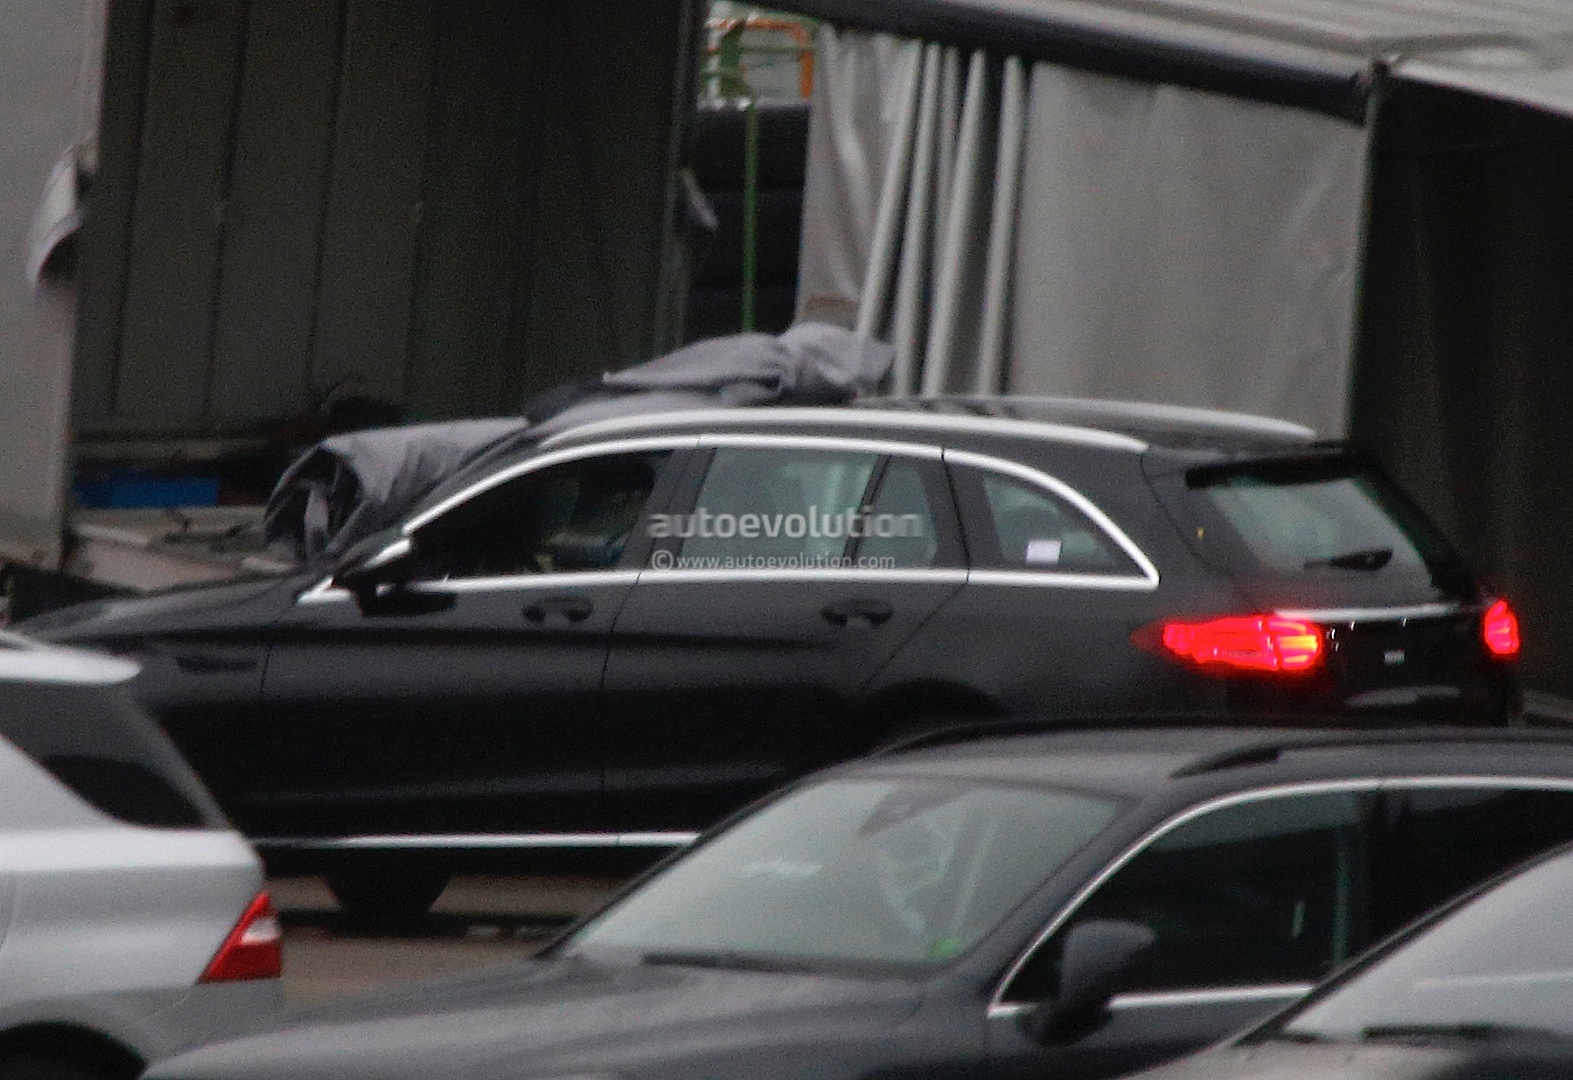 2014 - [Mercedes] Classe C [W205- S205] - Page 20 2015-c-class-wagon-s205-spied-completely-undisguised-photo-gallery-1080p-1